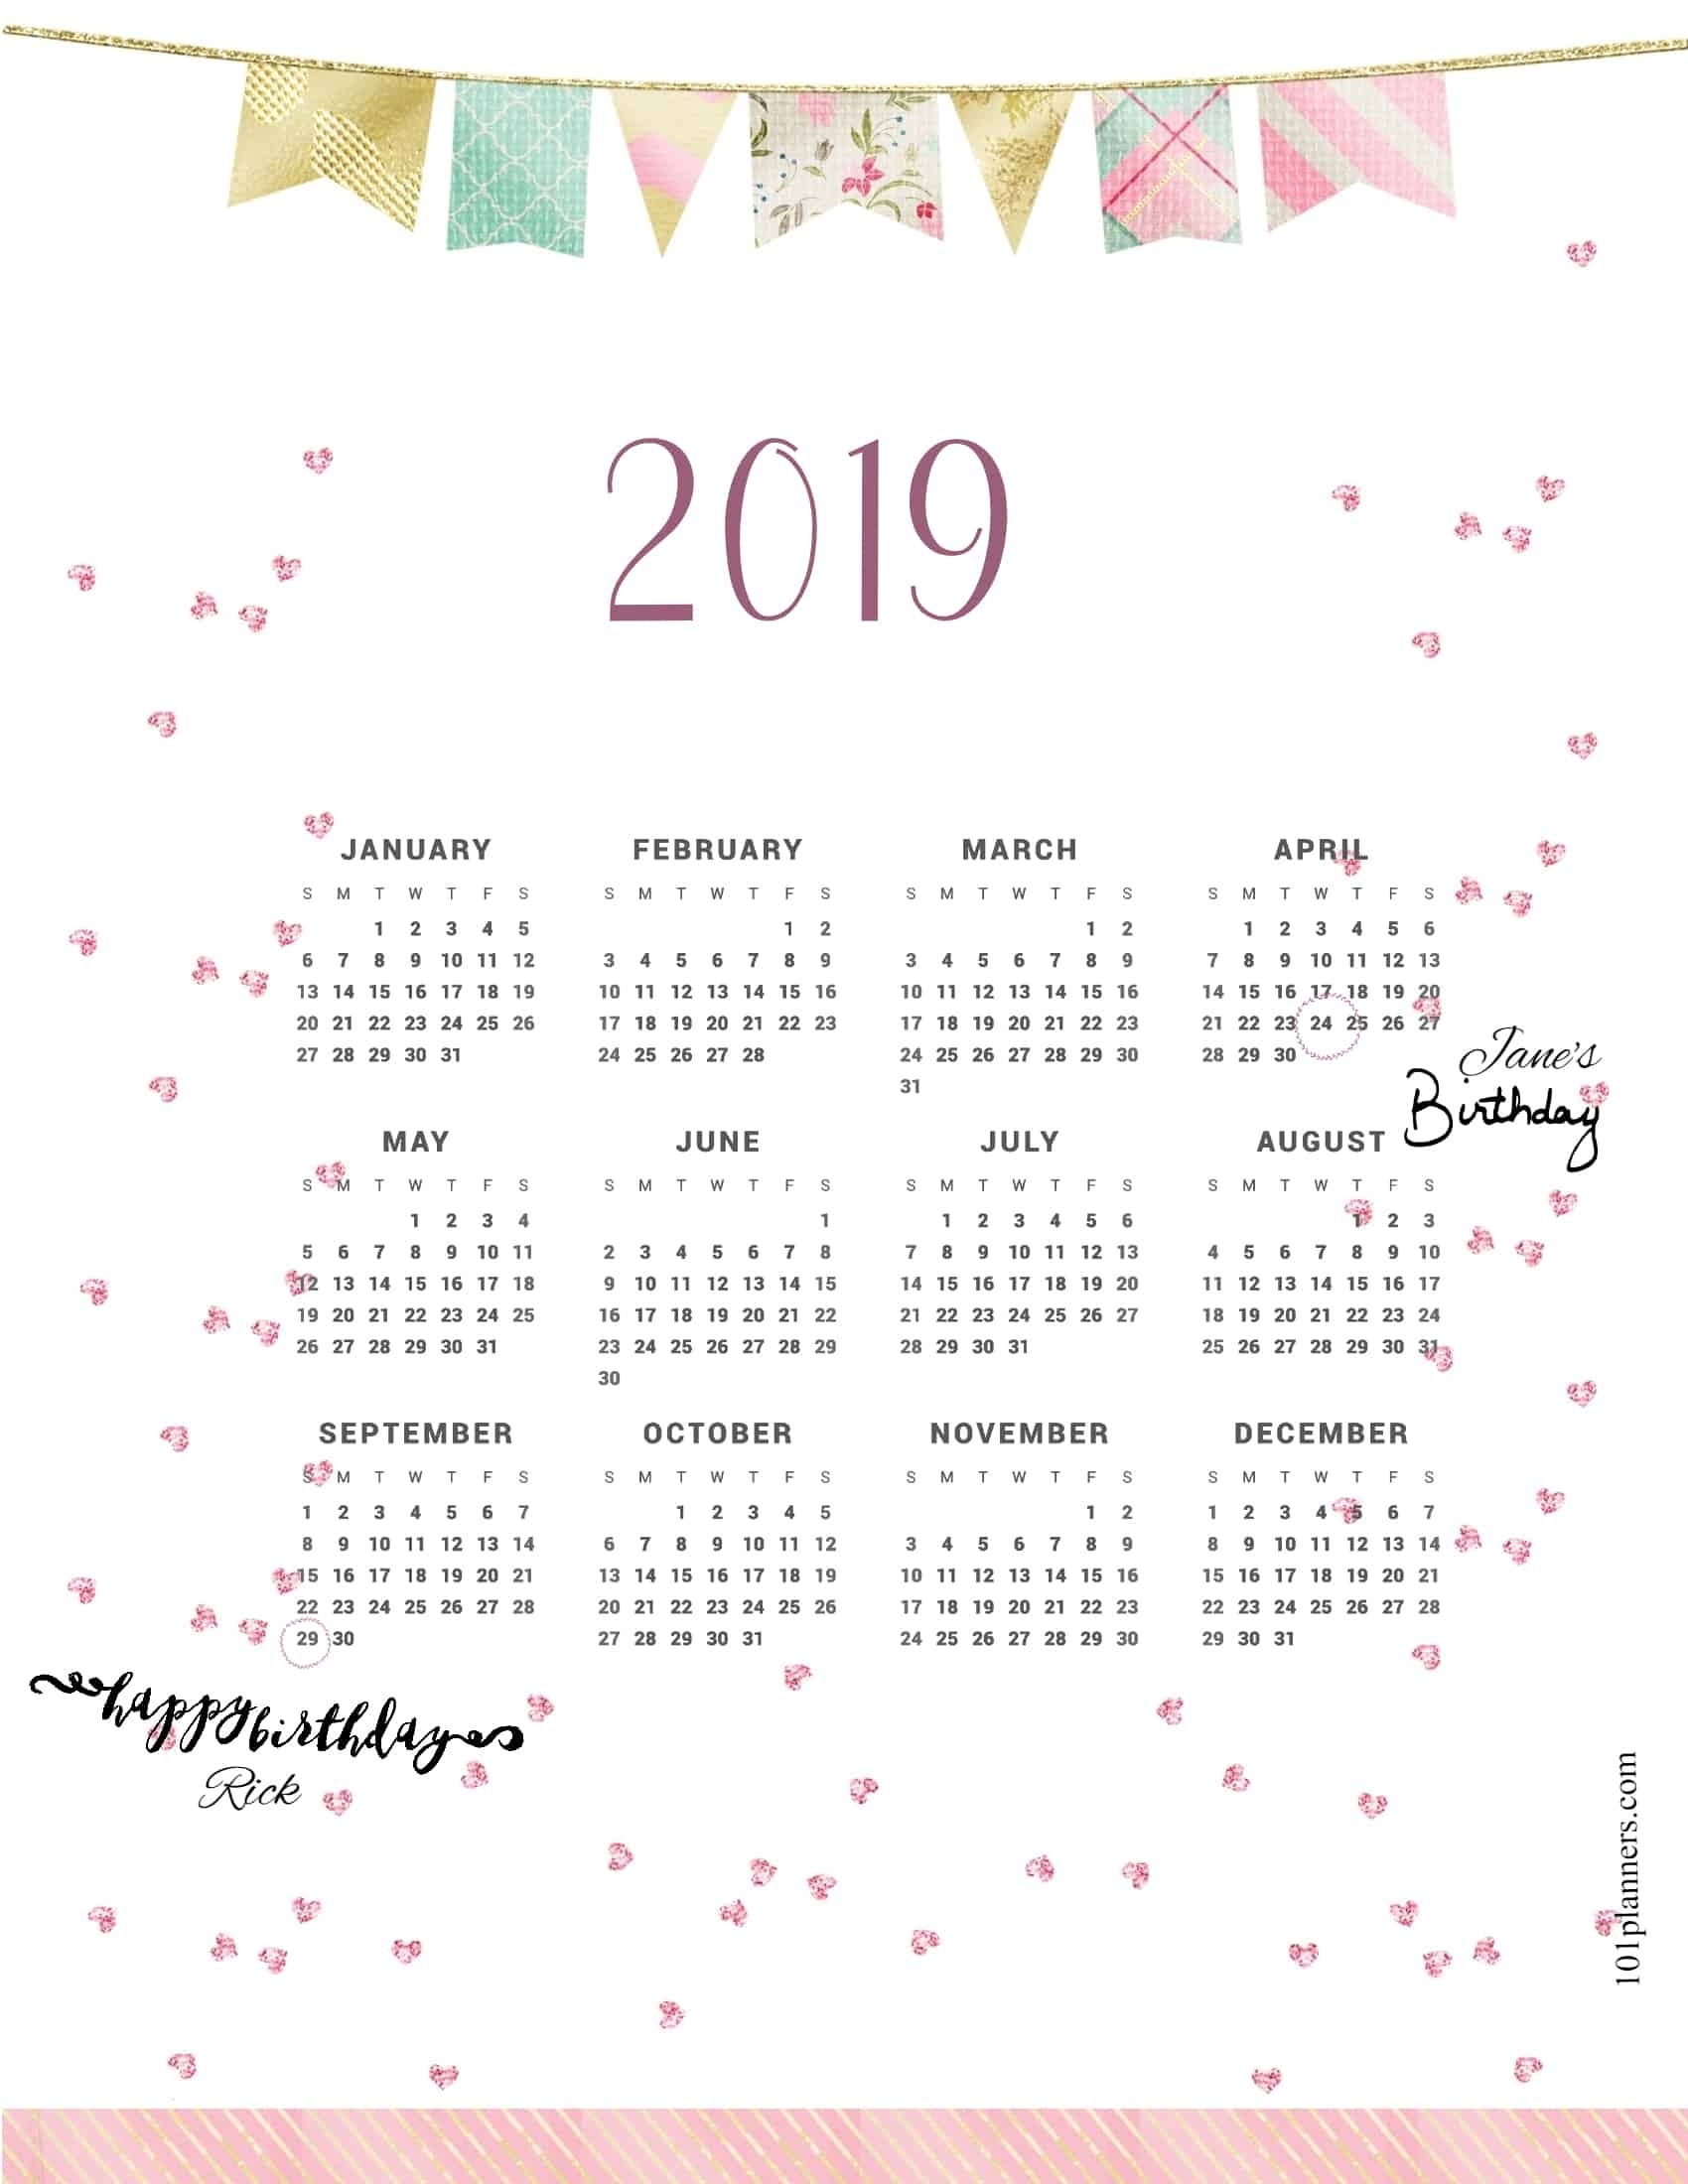 2019 Calendar pertaining to Yearly Calendar At A Glance Free Printable